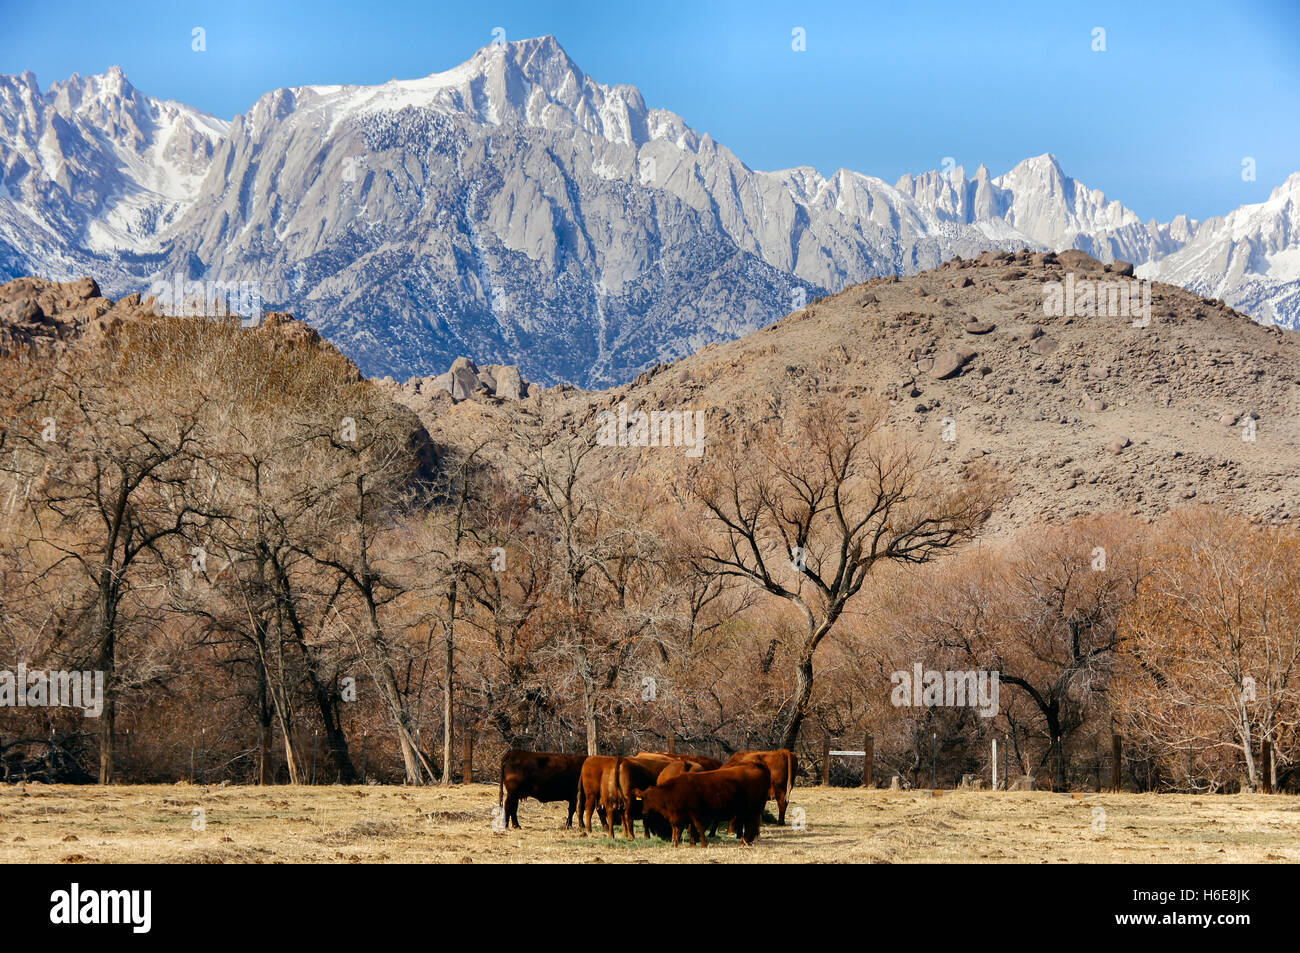 Mt. Whitney, Sierra Nevada Mountains, and Cows in the Foothills. Lone Pine, California, USA Stock Photo